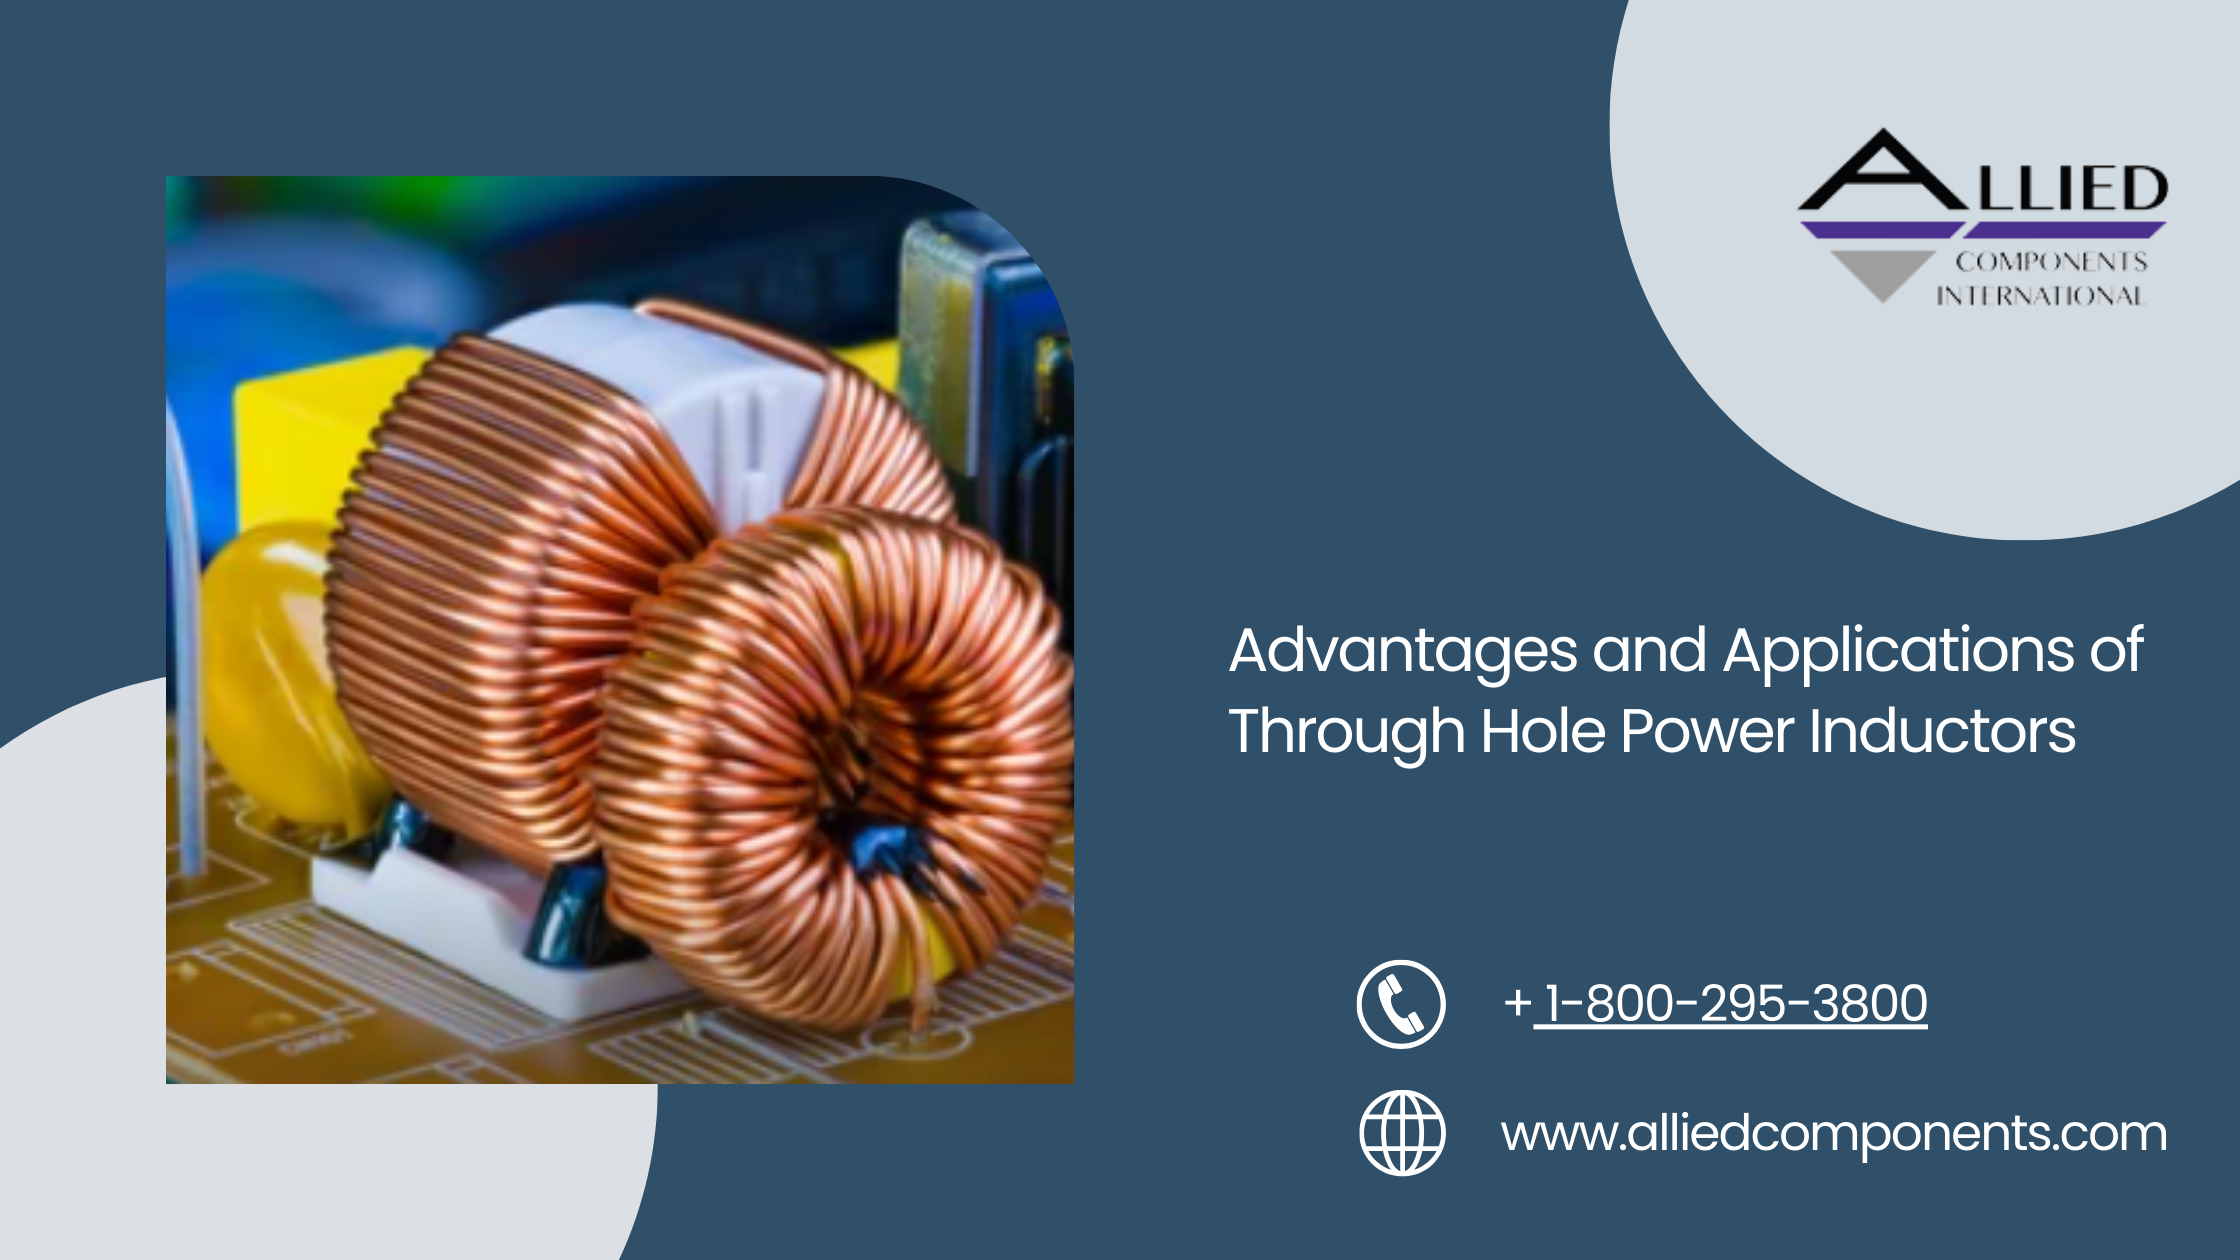 Advantages and Applications of Through-Hole Power Inductors